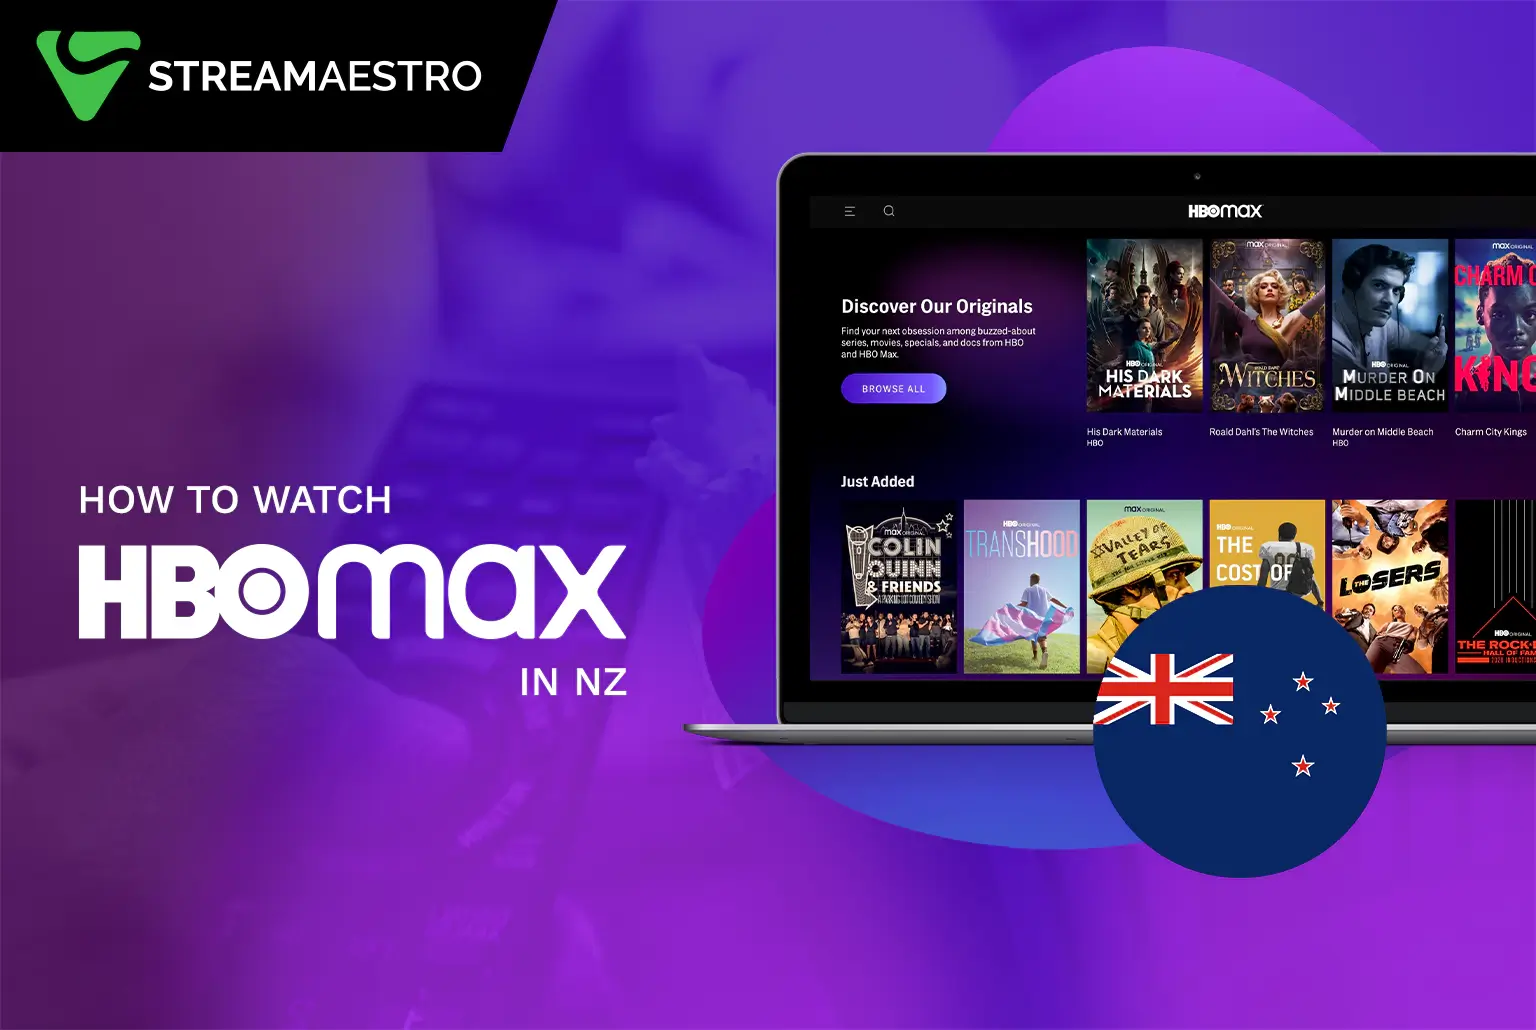 Watch HBO Max in NZ